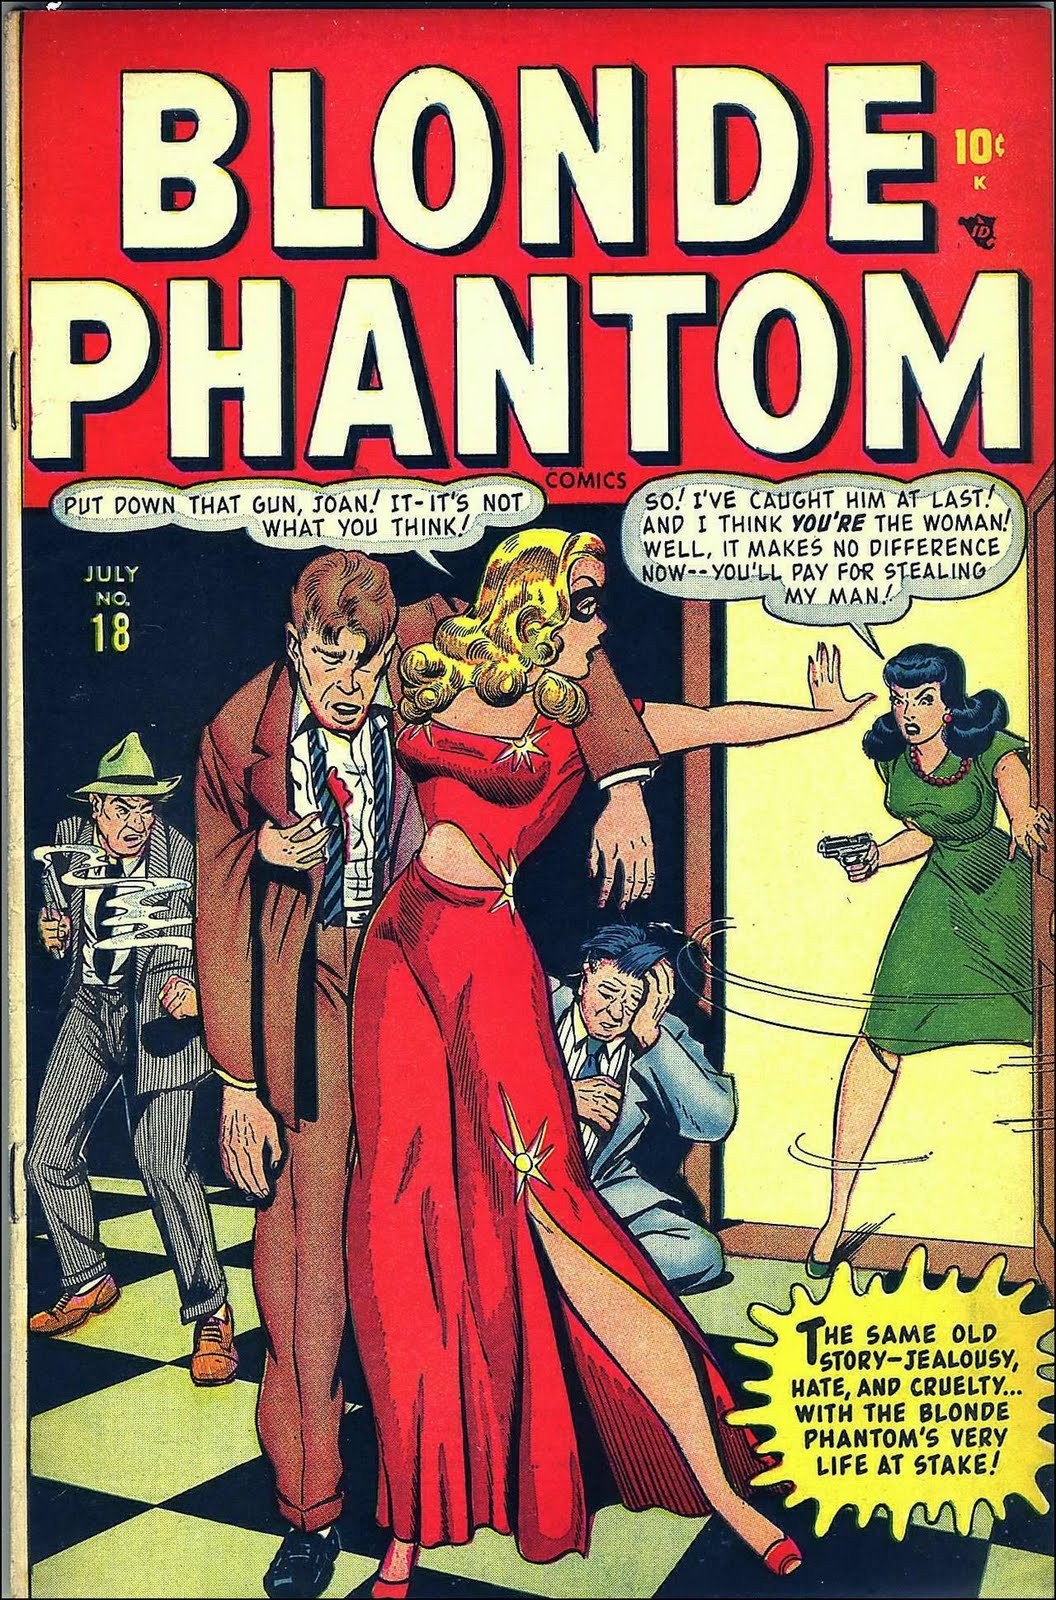 Blonde Phantom #18, July 1948. Cover art by Syd Shores.